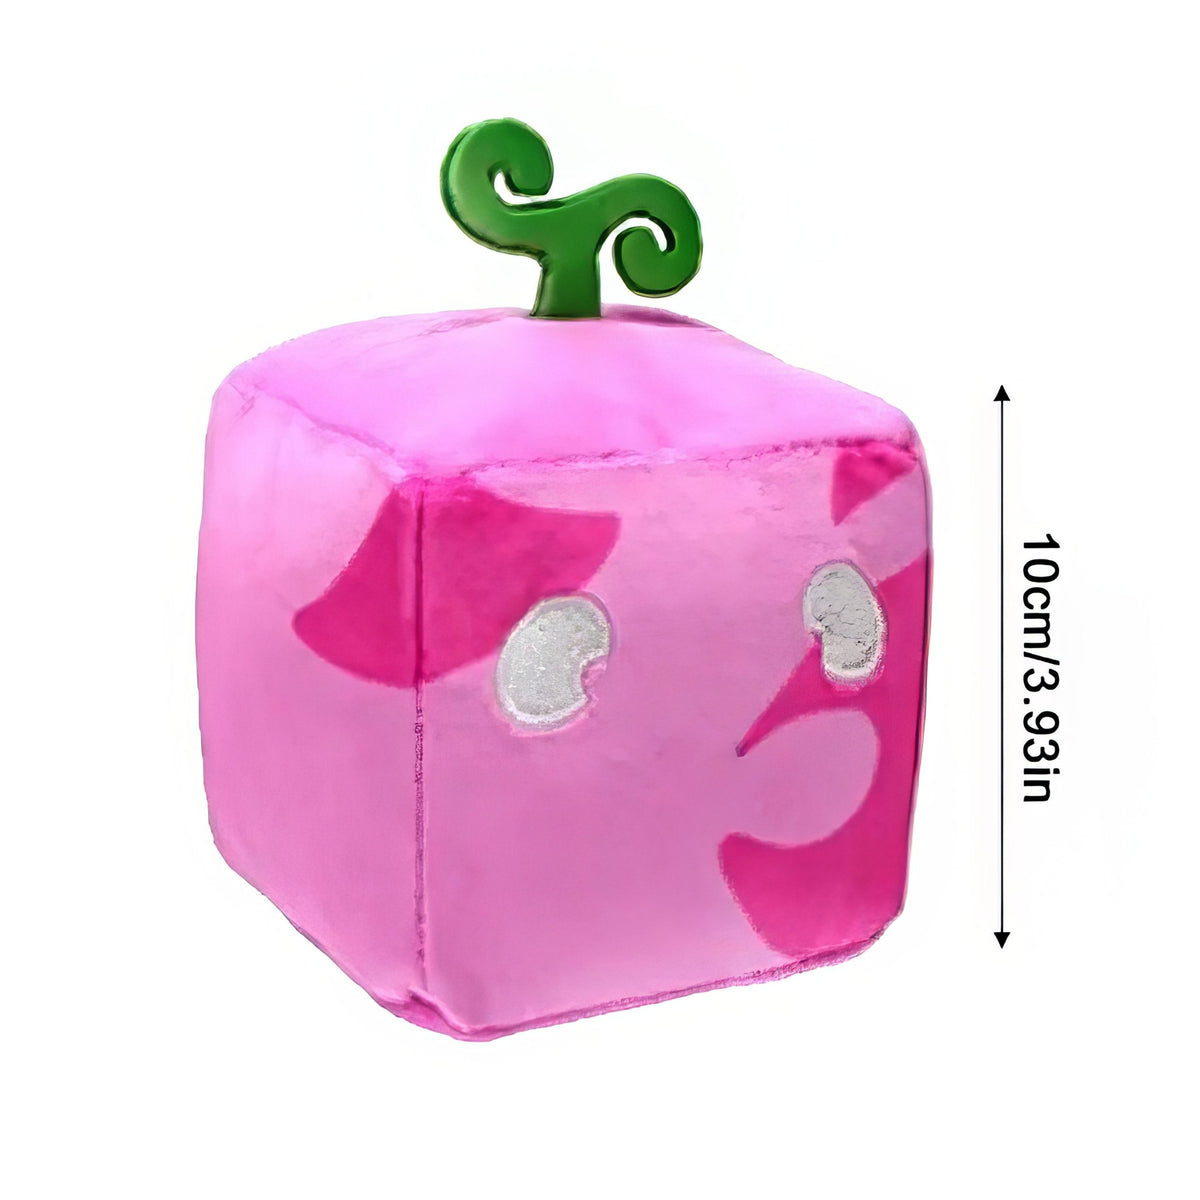 WISTIC Box Plush Doll Blox Fruits Plush Toy with Code Cute Anime Stuffed  Doll for Game Fans Limited Edition Collectible